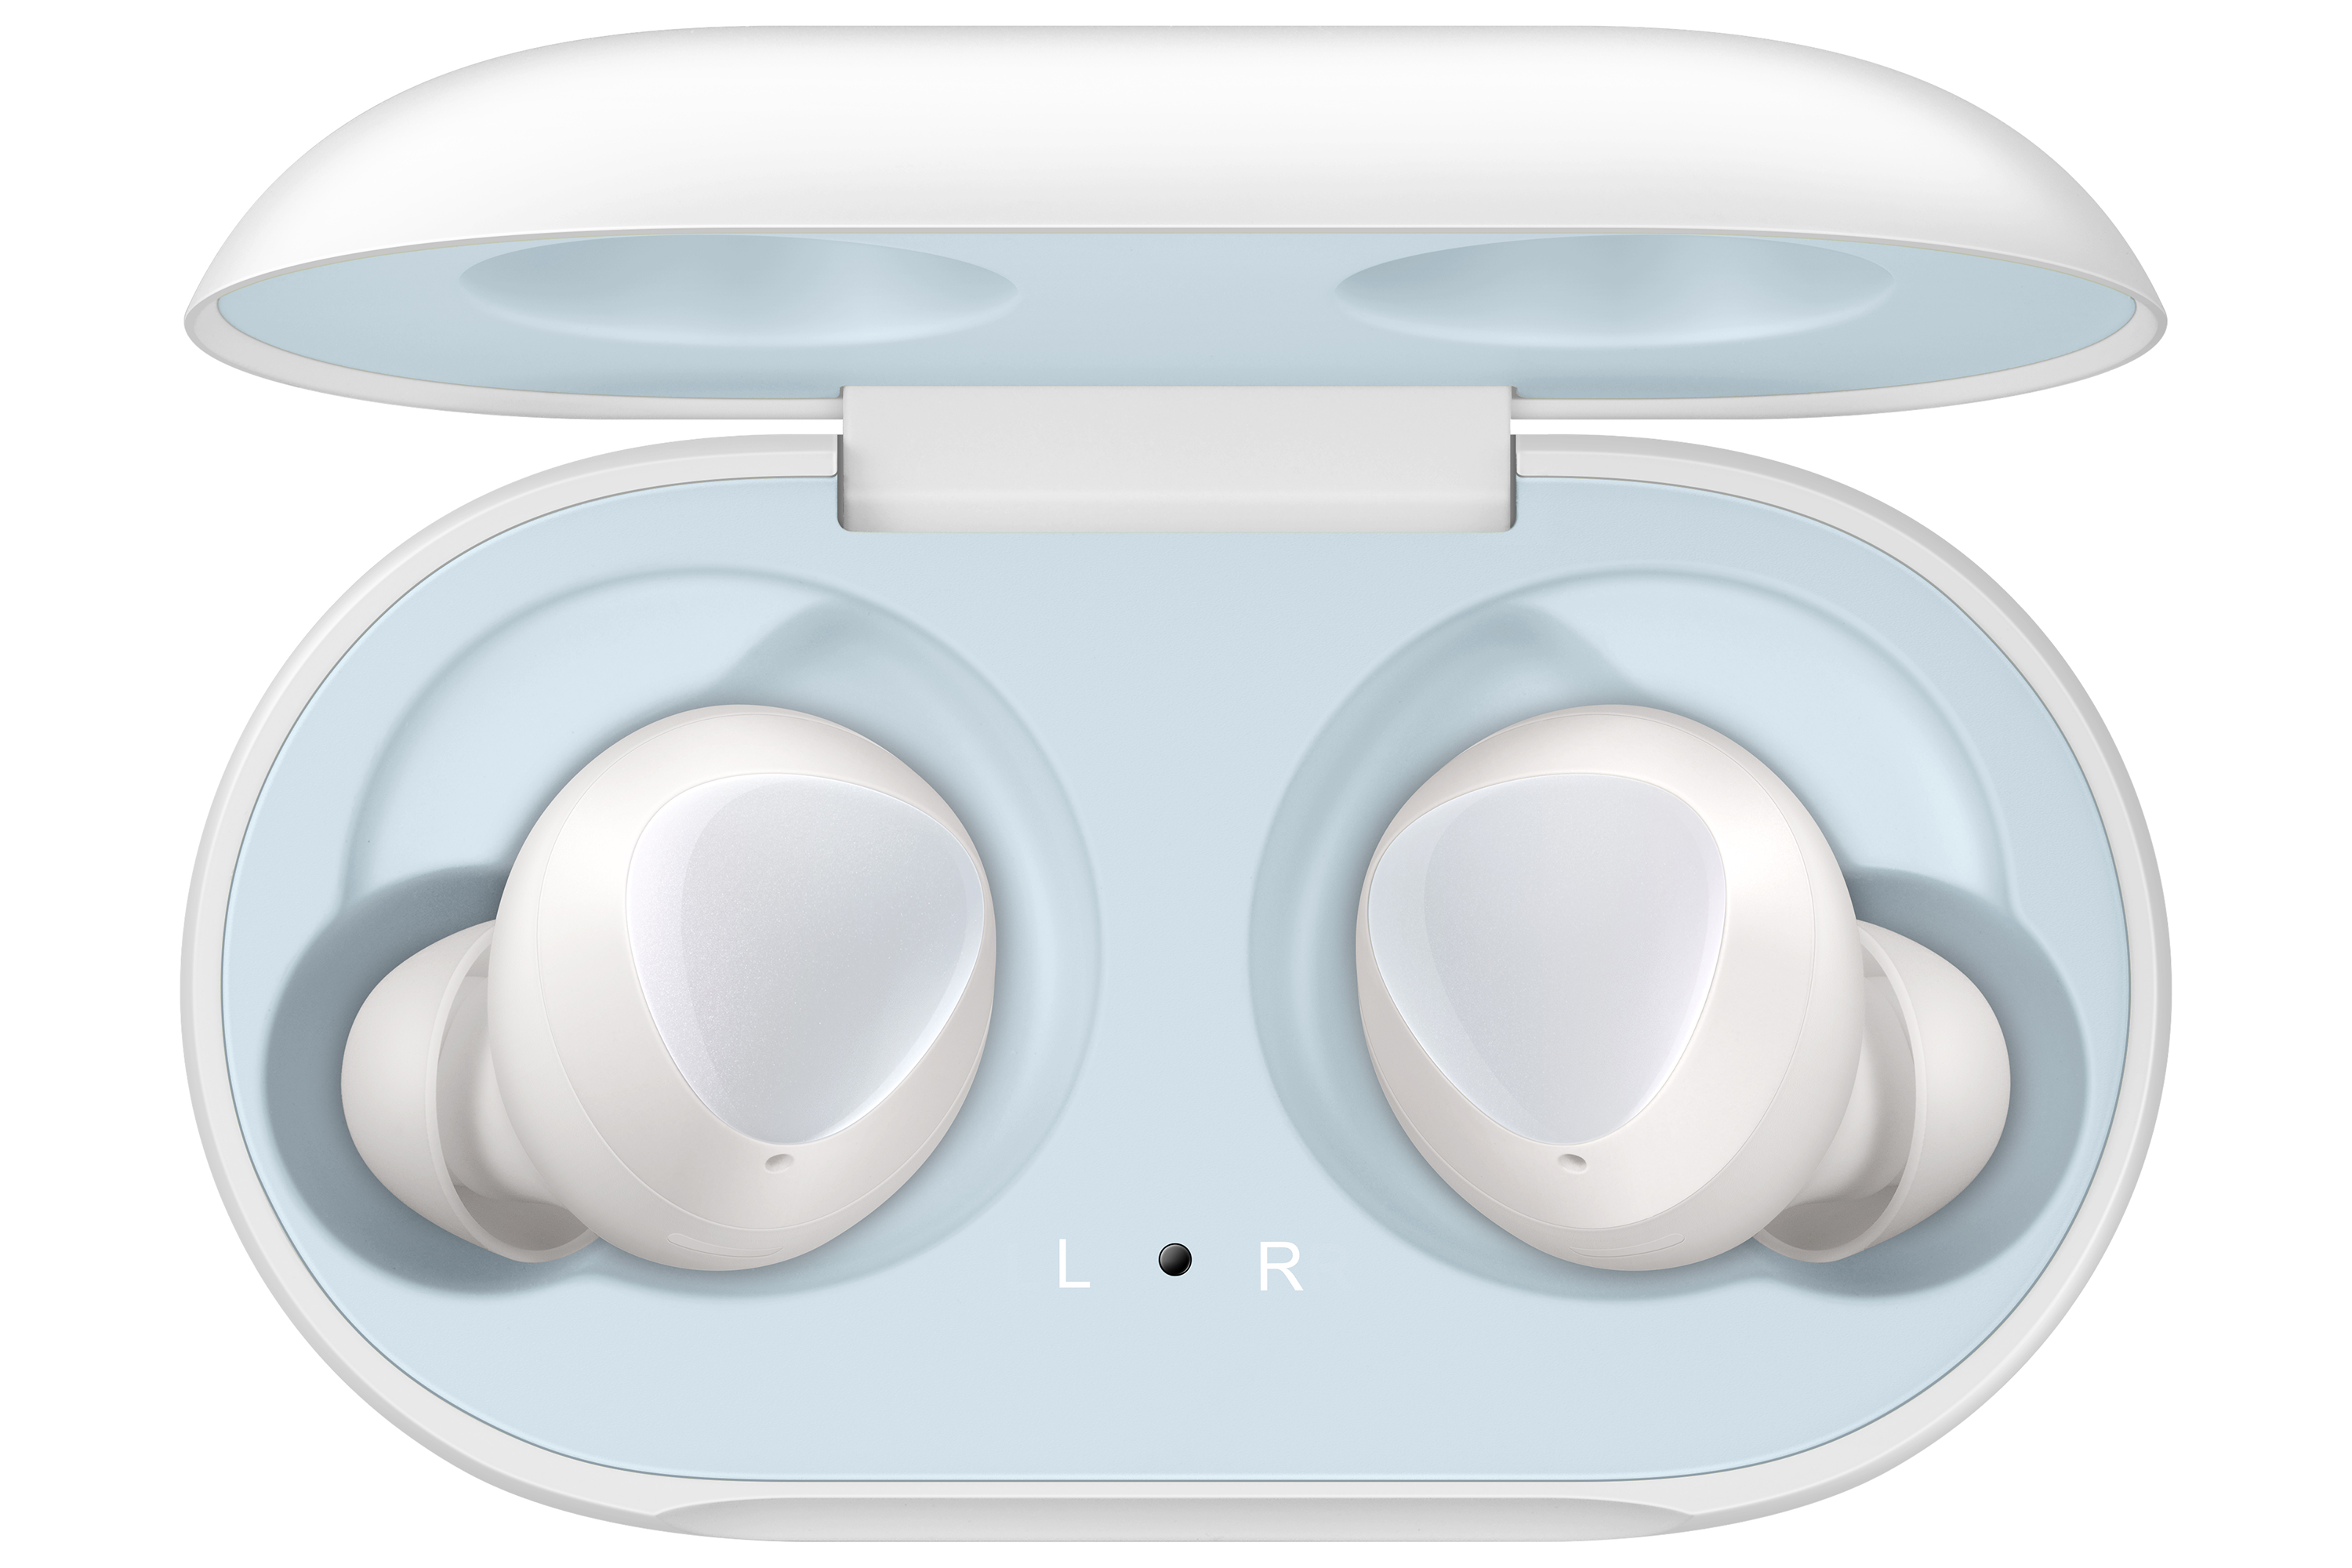 SAMSUNG Galaxy Buds, White (Charging Case Included) - image 10 of 17